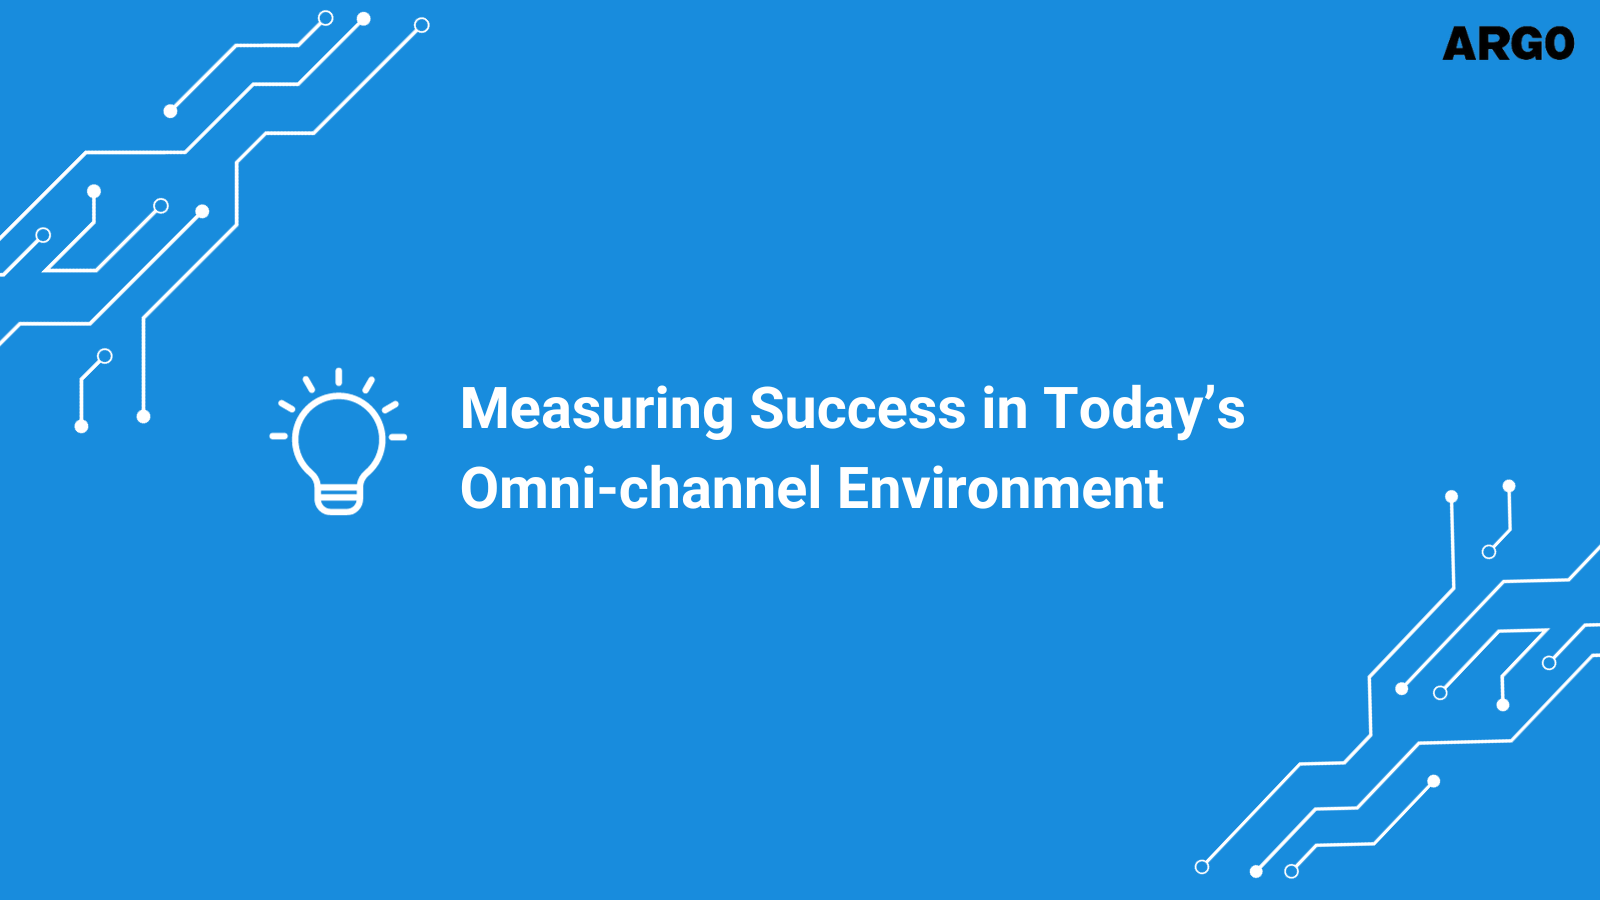 Measuring Success in Today's Omni-channel Environment